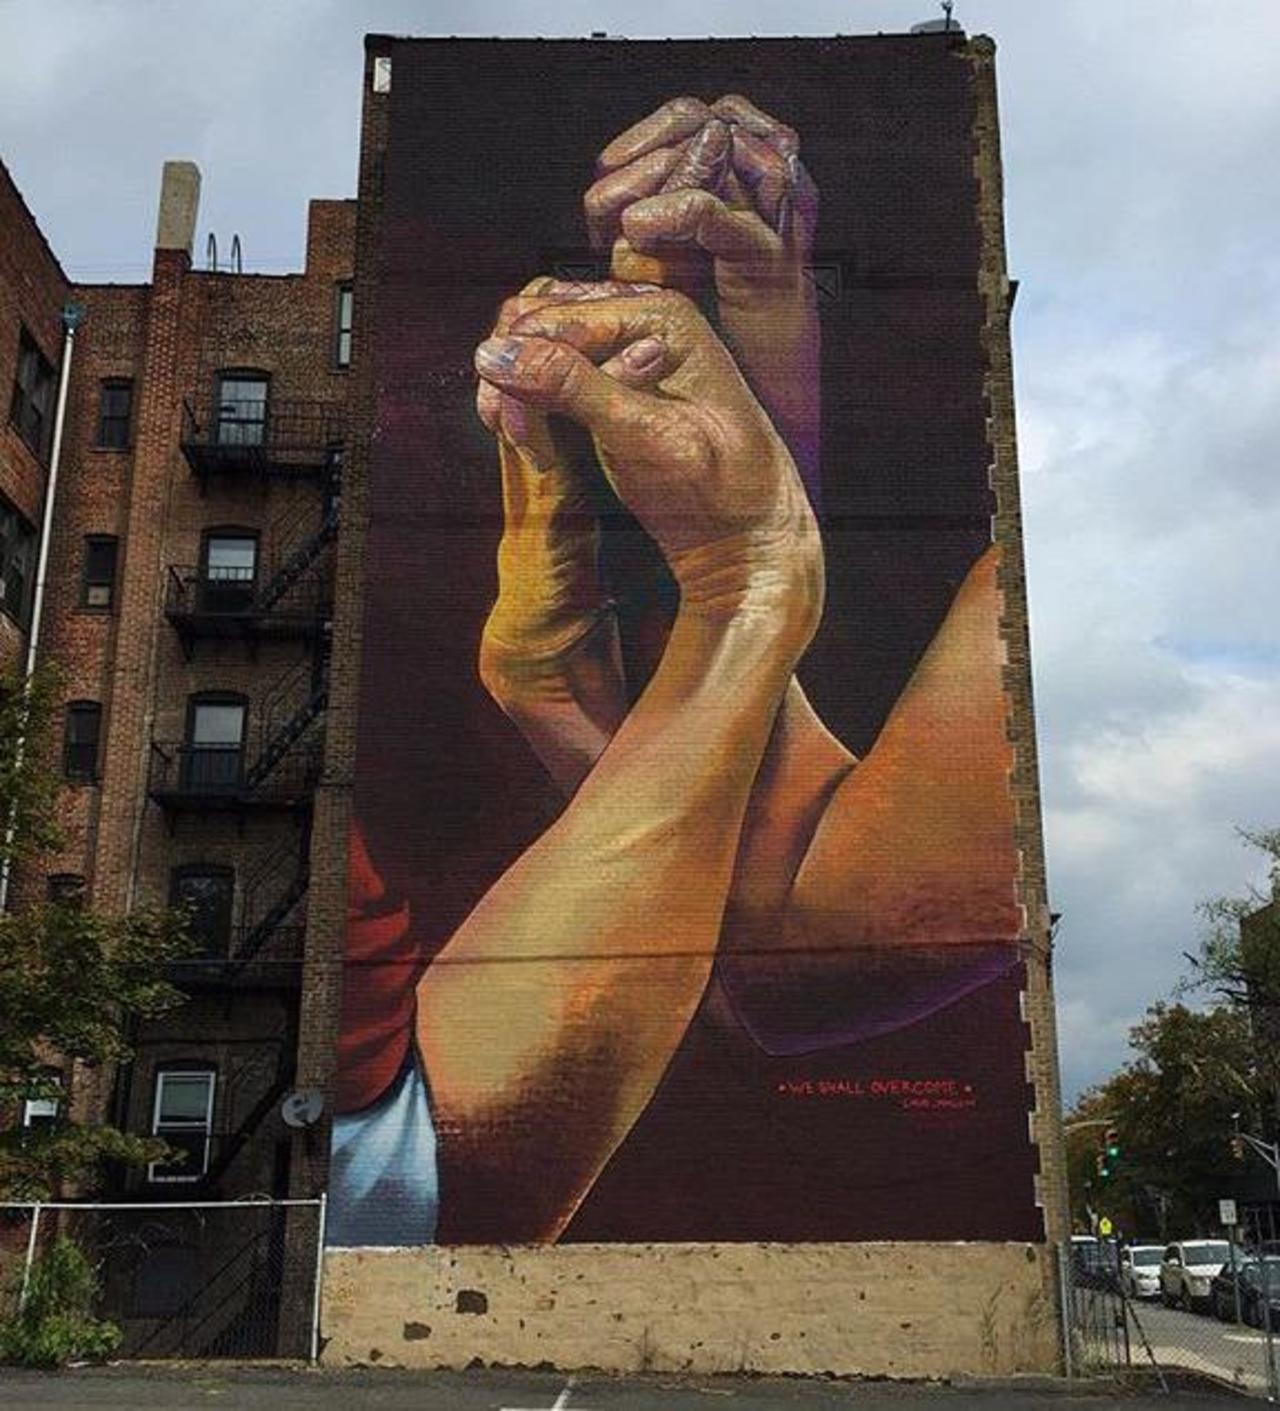 New Street Art by CaseMaclaim in Jersey City for the TheBKcollective 

#art #graffiti #mural #streetart http://t.co/I3ZF2jFmEk